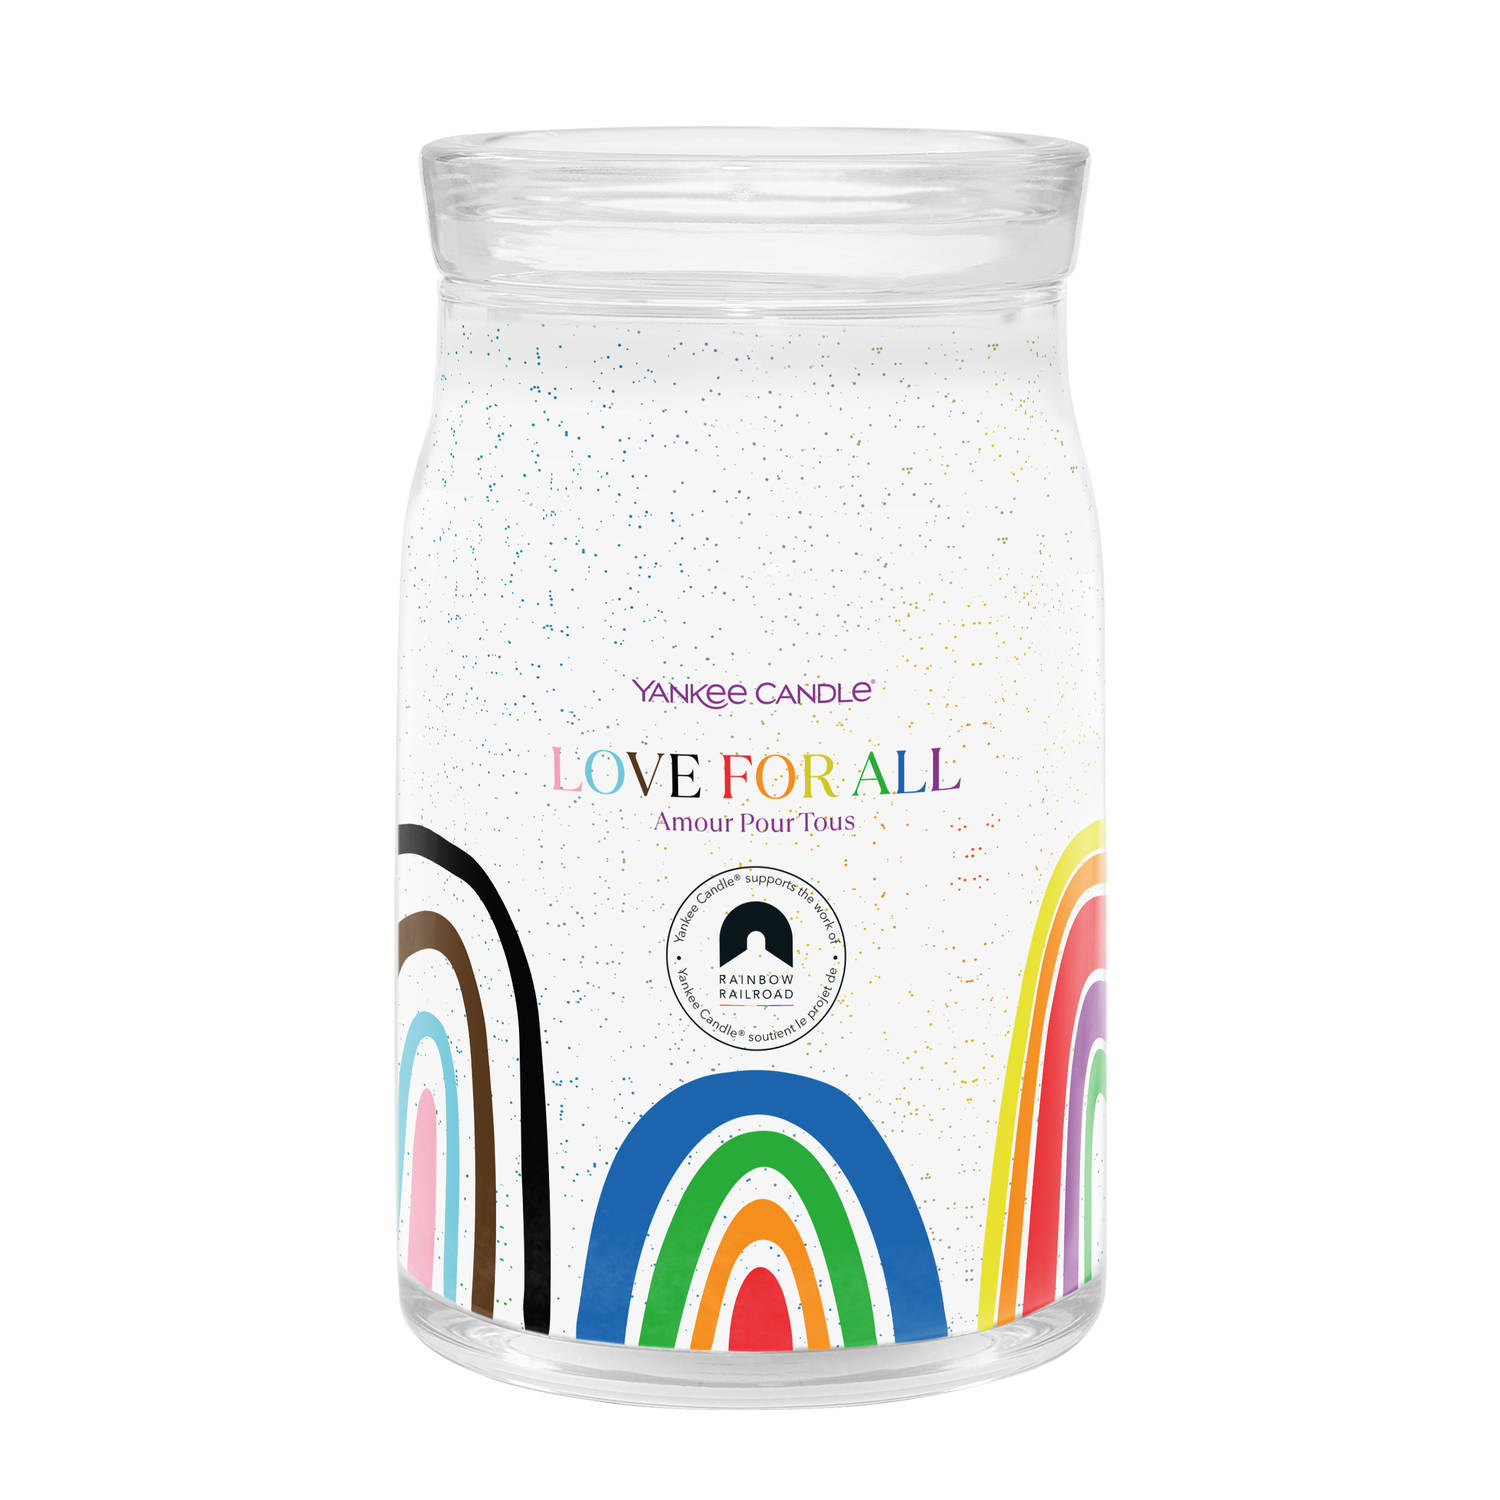 Yankee Candle - Love For All Signature Large Jar